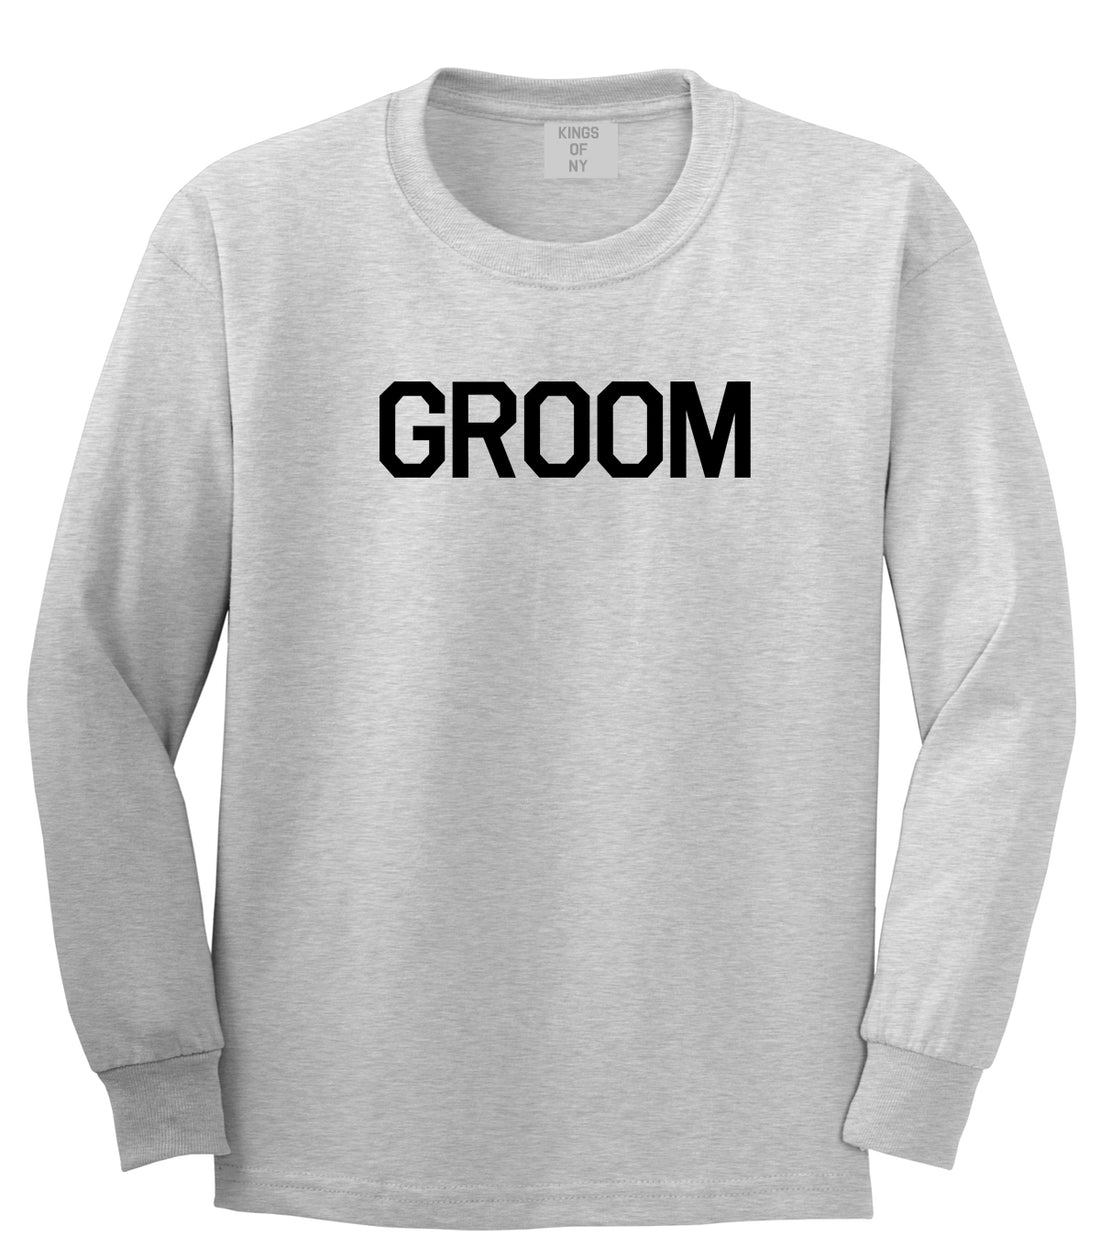 The Groom Bachelor Party Grey Long Sleeve T-Shirt by Kings Of NY